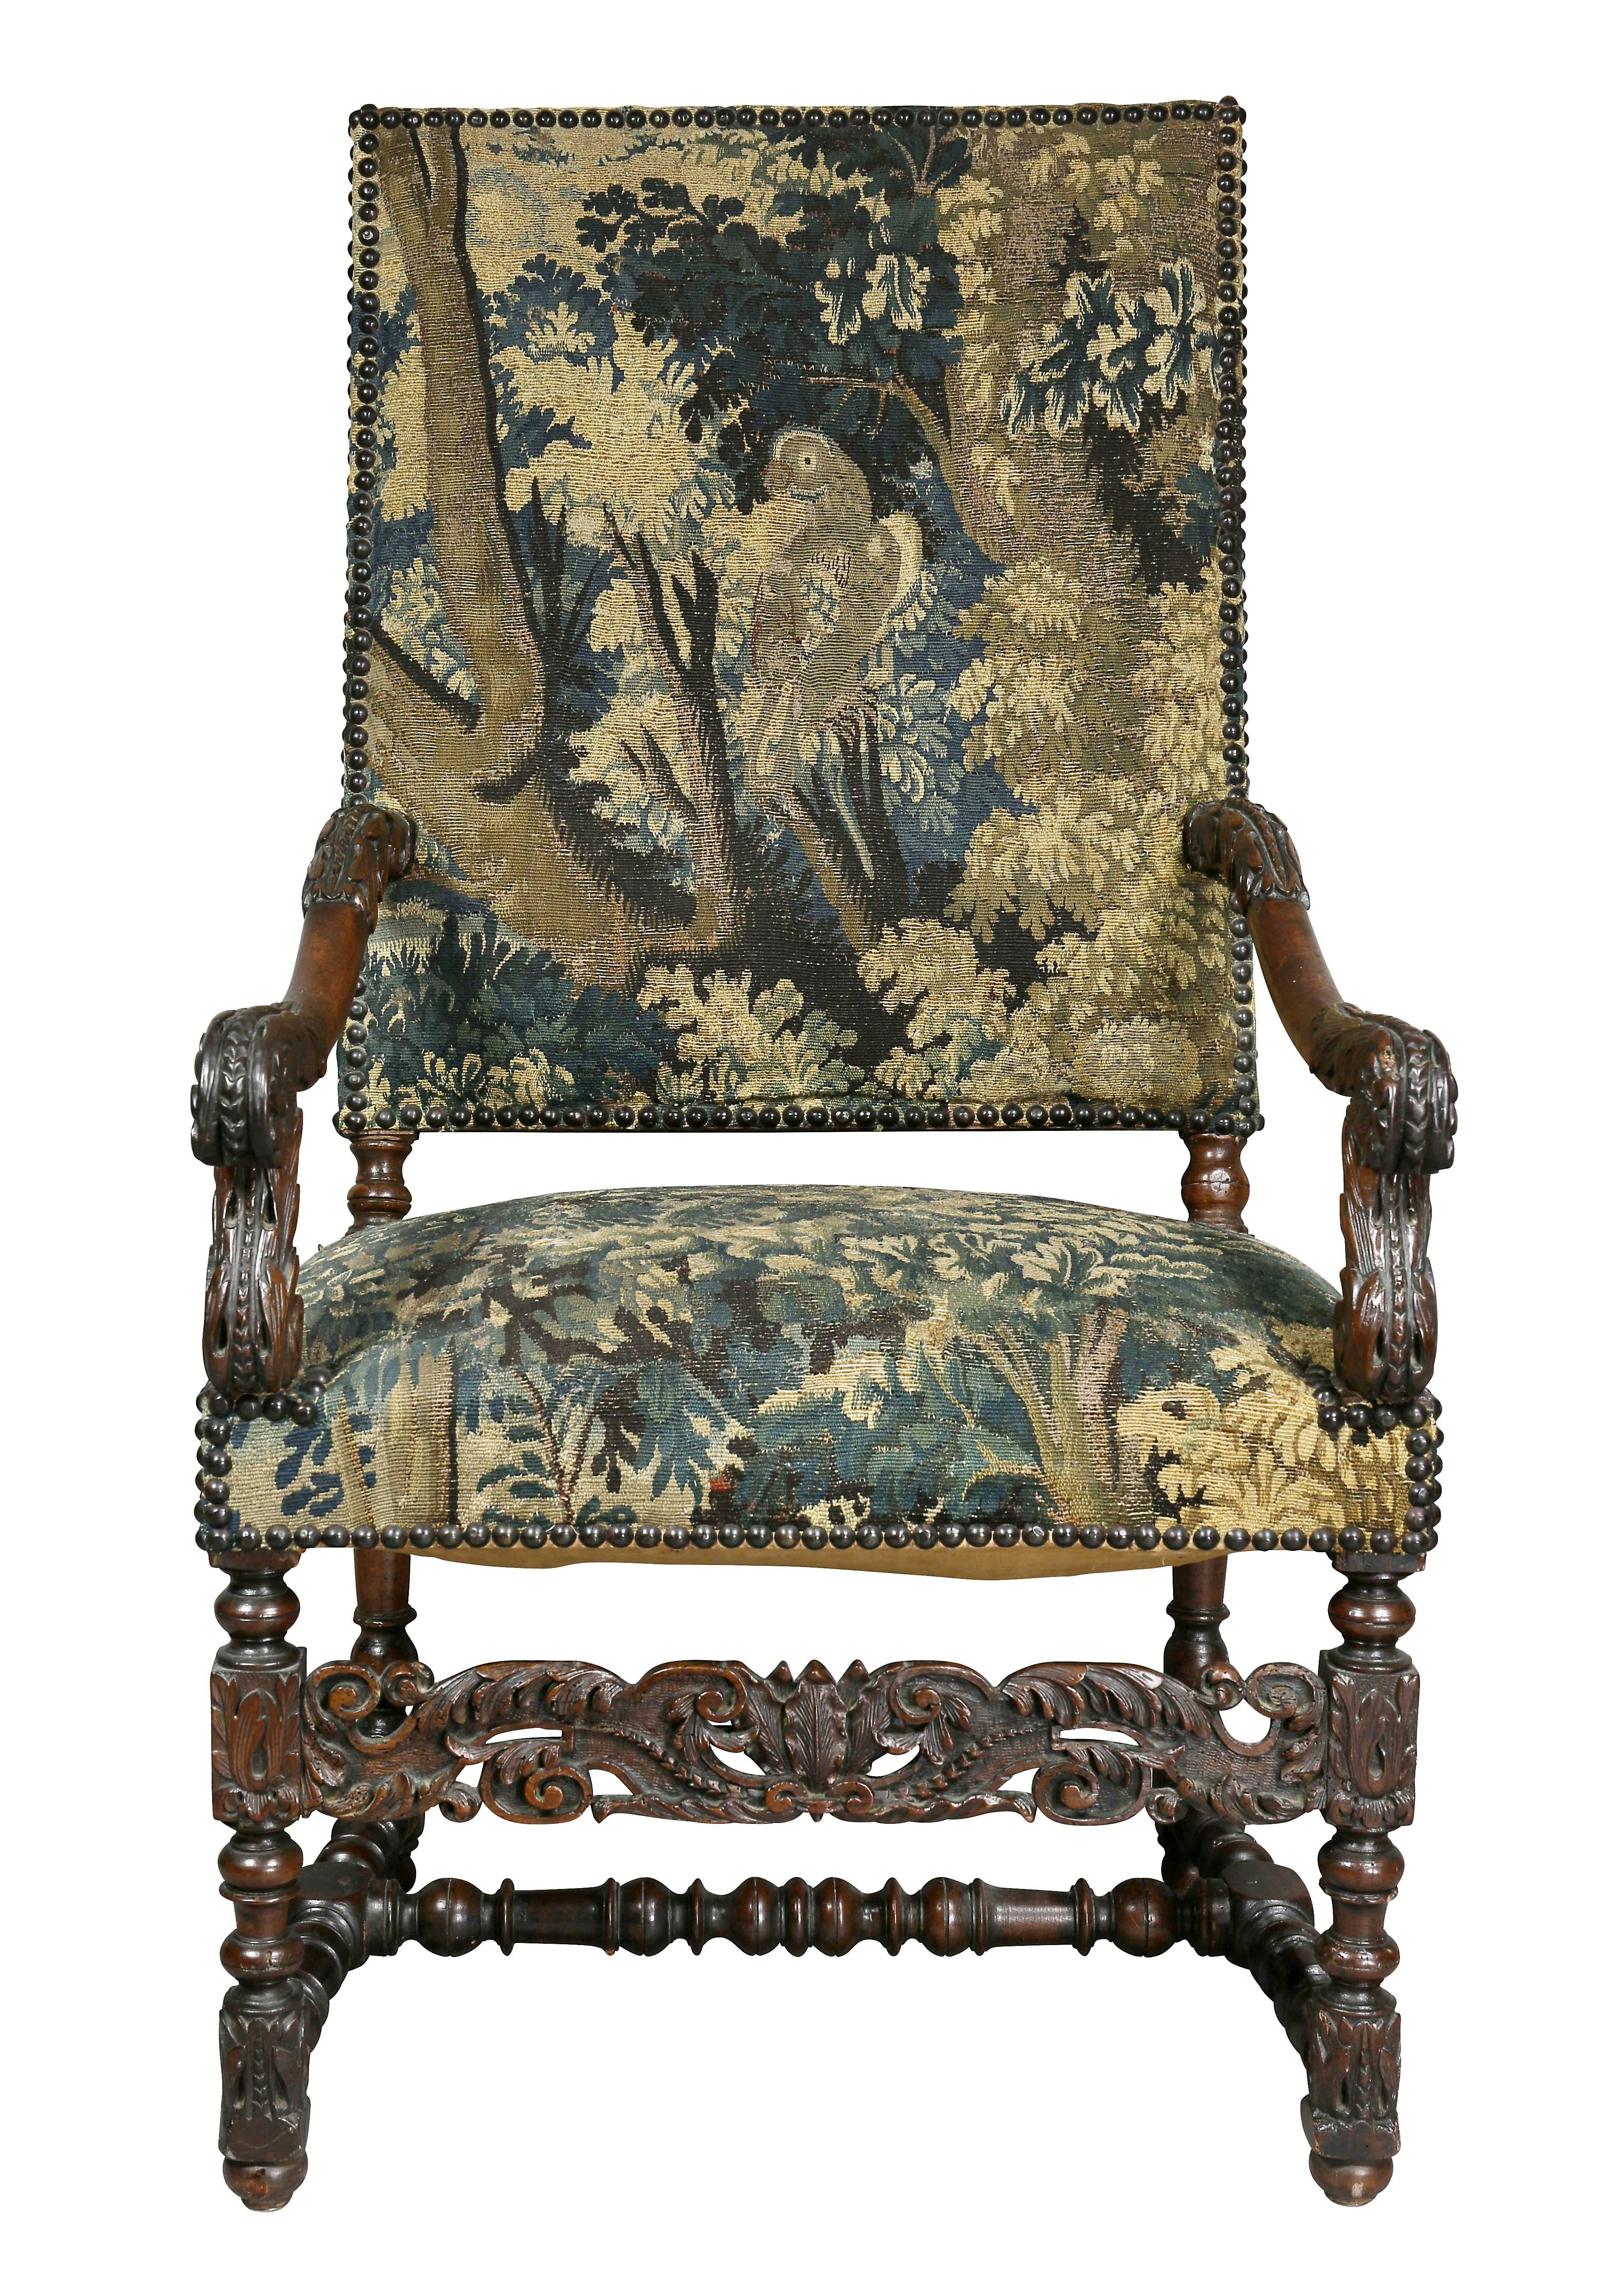 Late 17th Century Flemish Baroque Walnut And Tapestry Upholstered Armchair